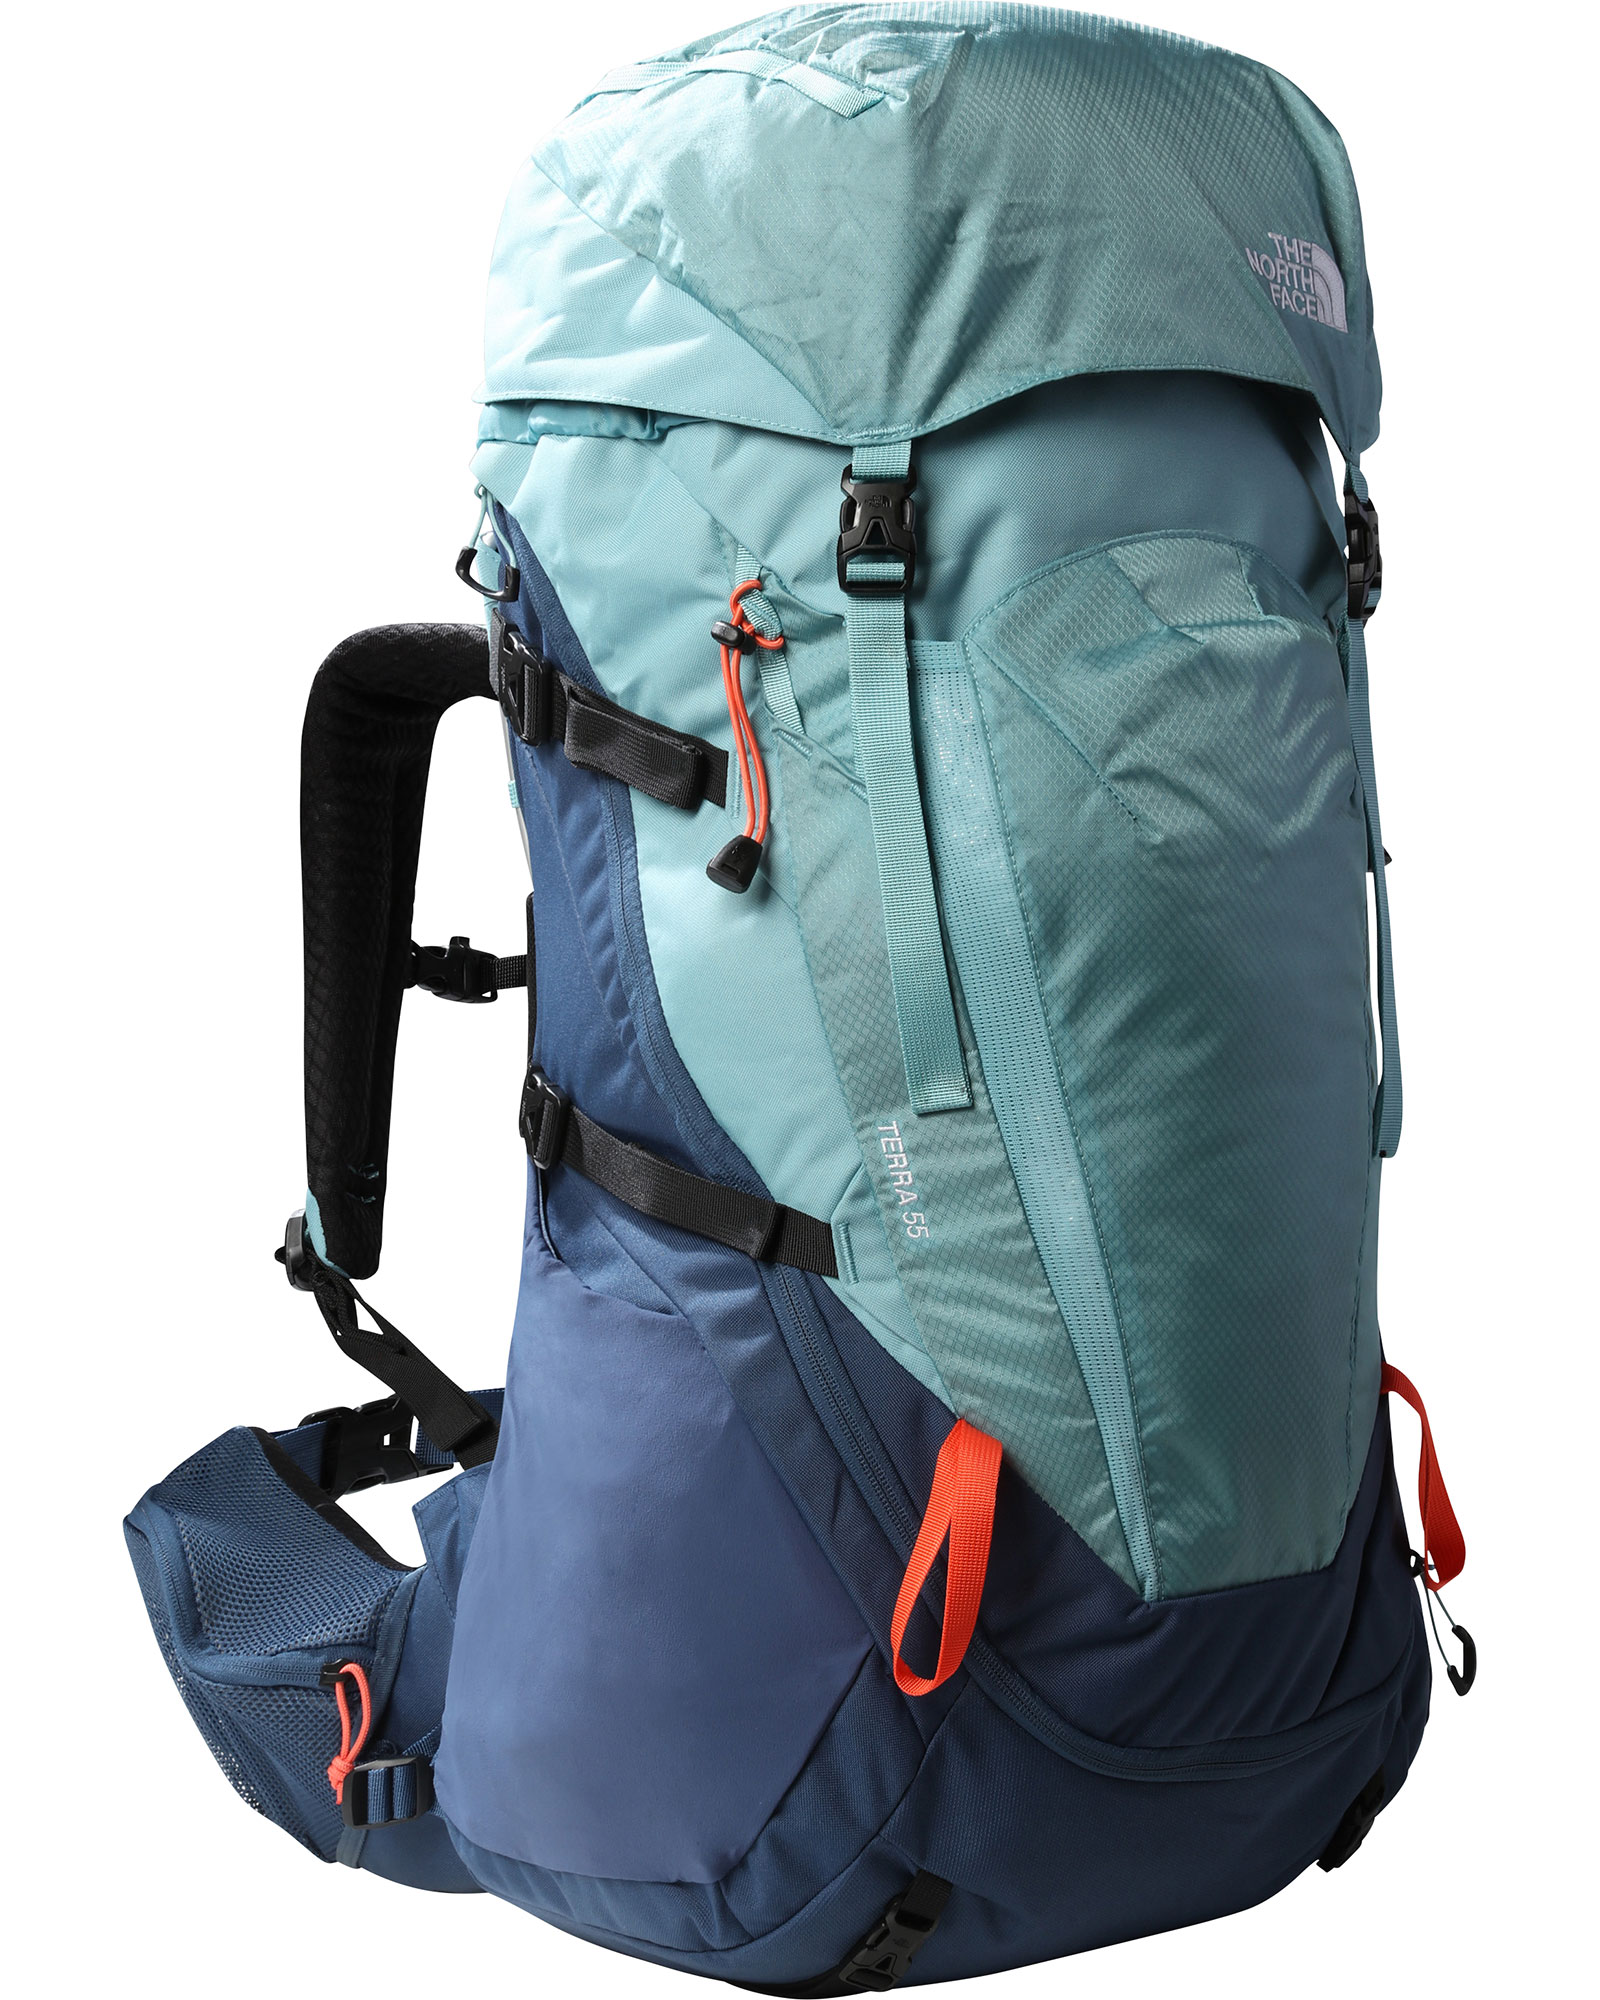 The North Face Terra 55 Women’s Backpack - Reef Waters/Shady Blue/Retro Orange XS/S